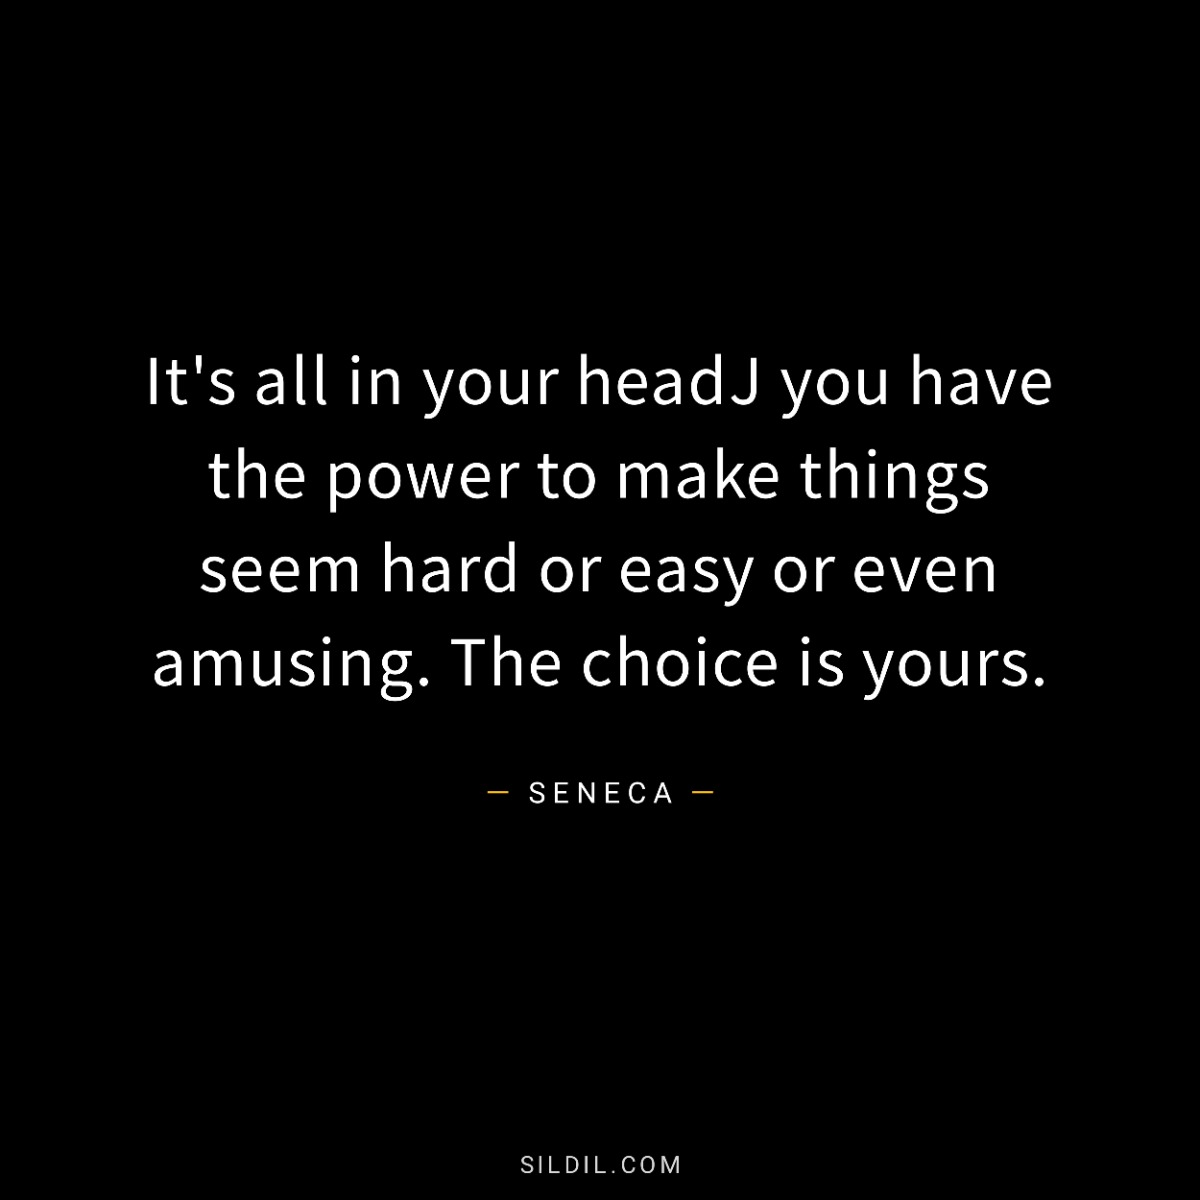 It's all in your headJ you have the power to make things seem hard or easy or even amusing. The choice is yours.